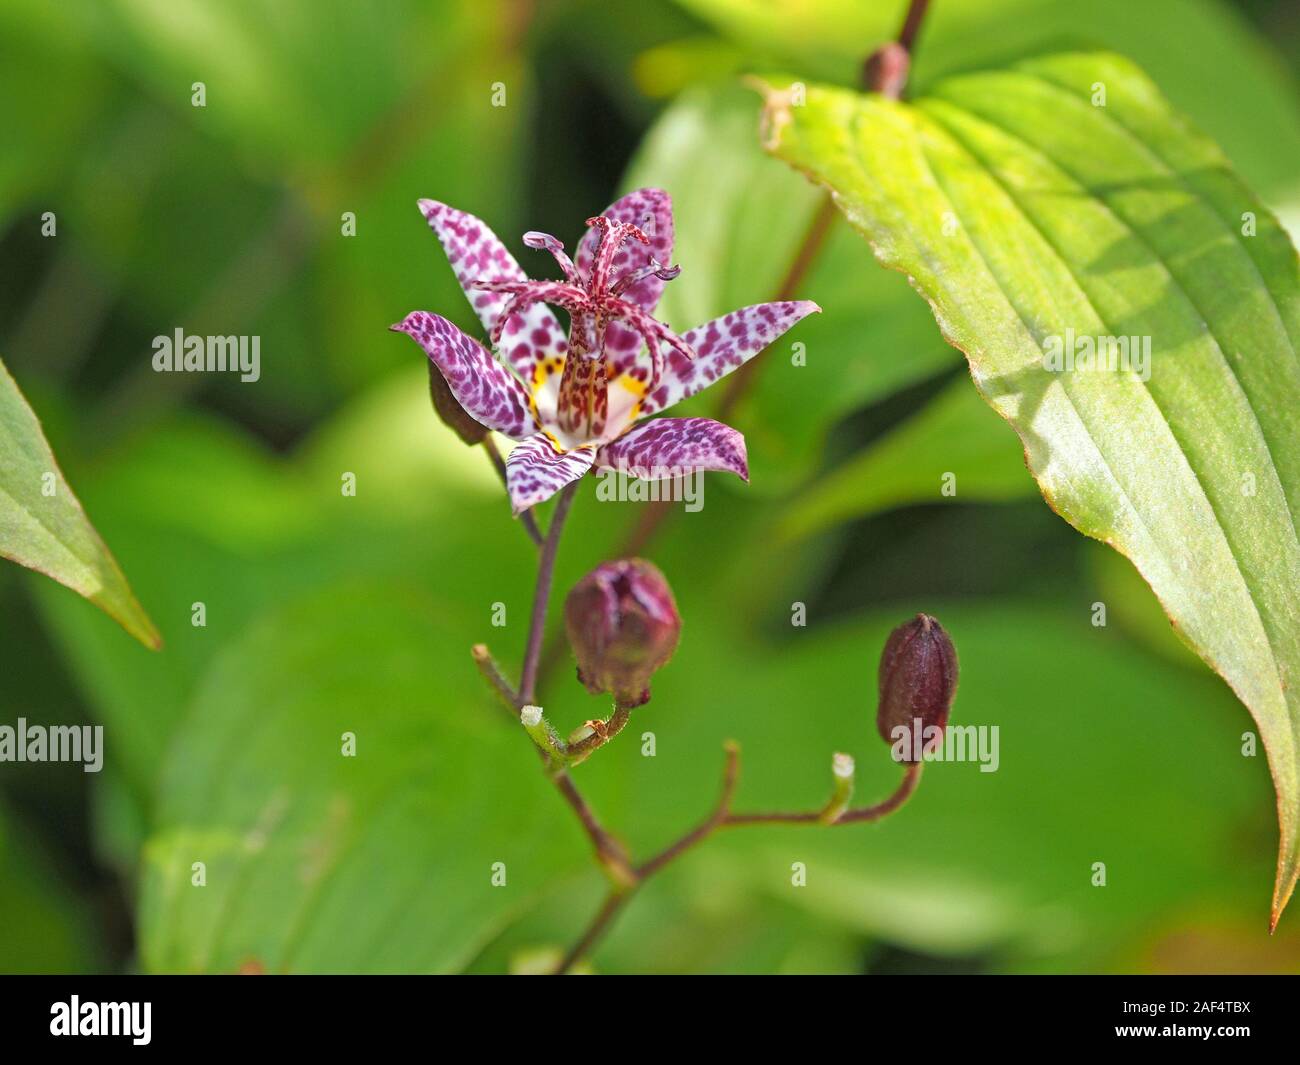 exotic purple white and yellow spotted flower of Toad Lily (Tricyrtis hirta) Kirkcudbright, Dumfries & Galloway,Scotland, UK Stock Photo